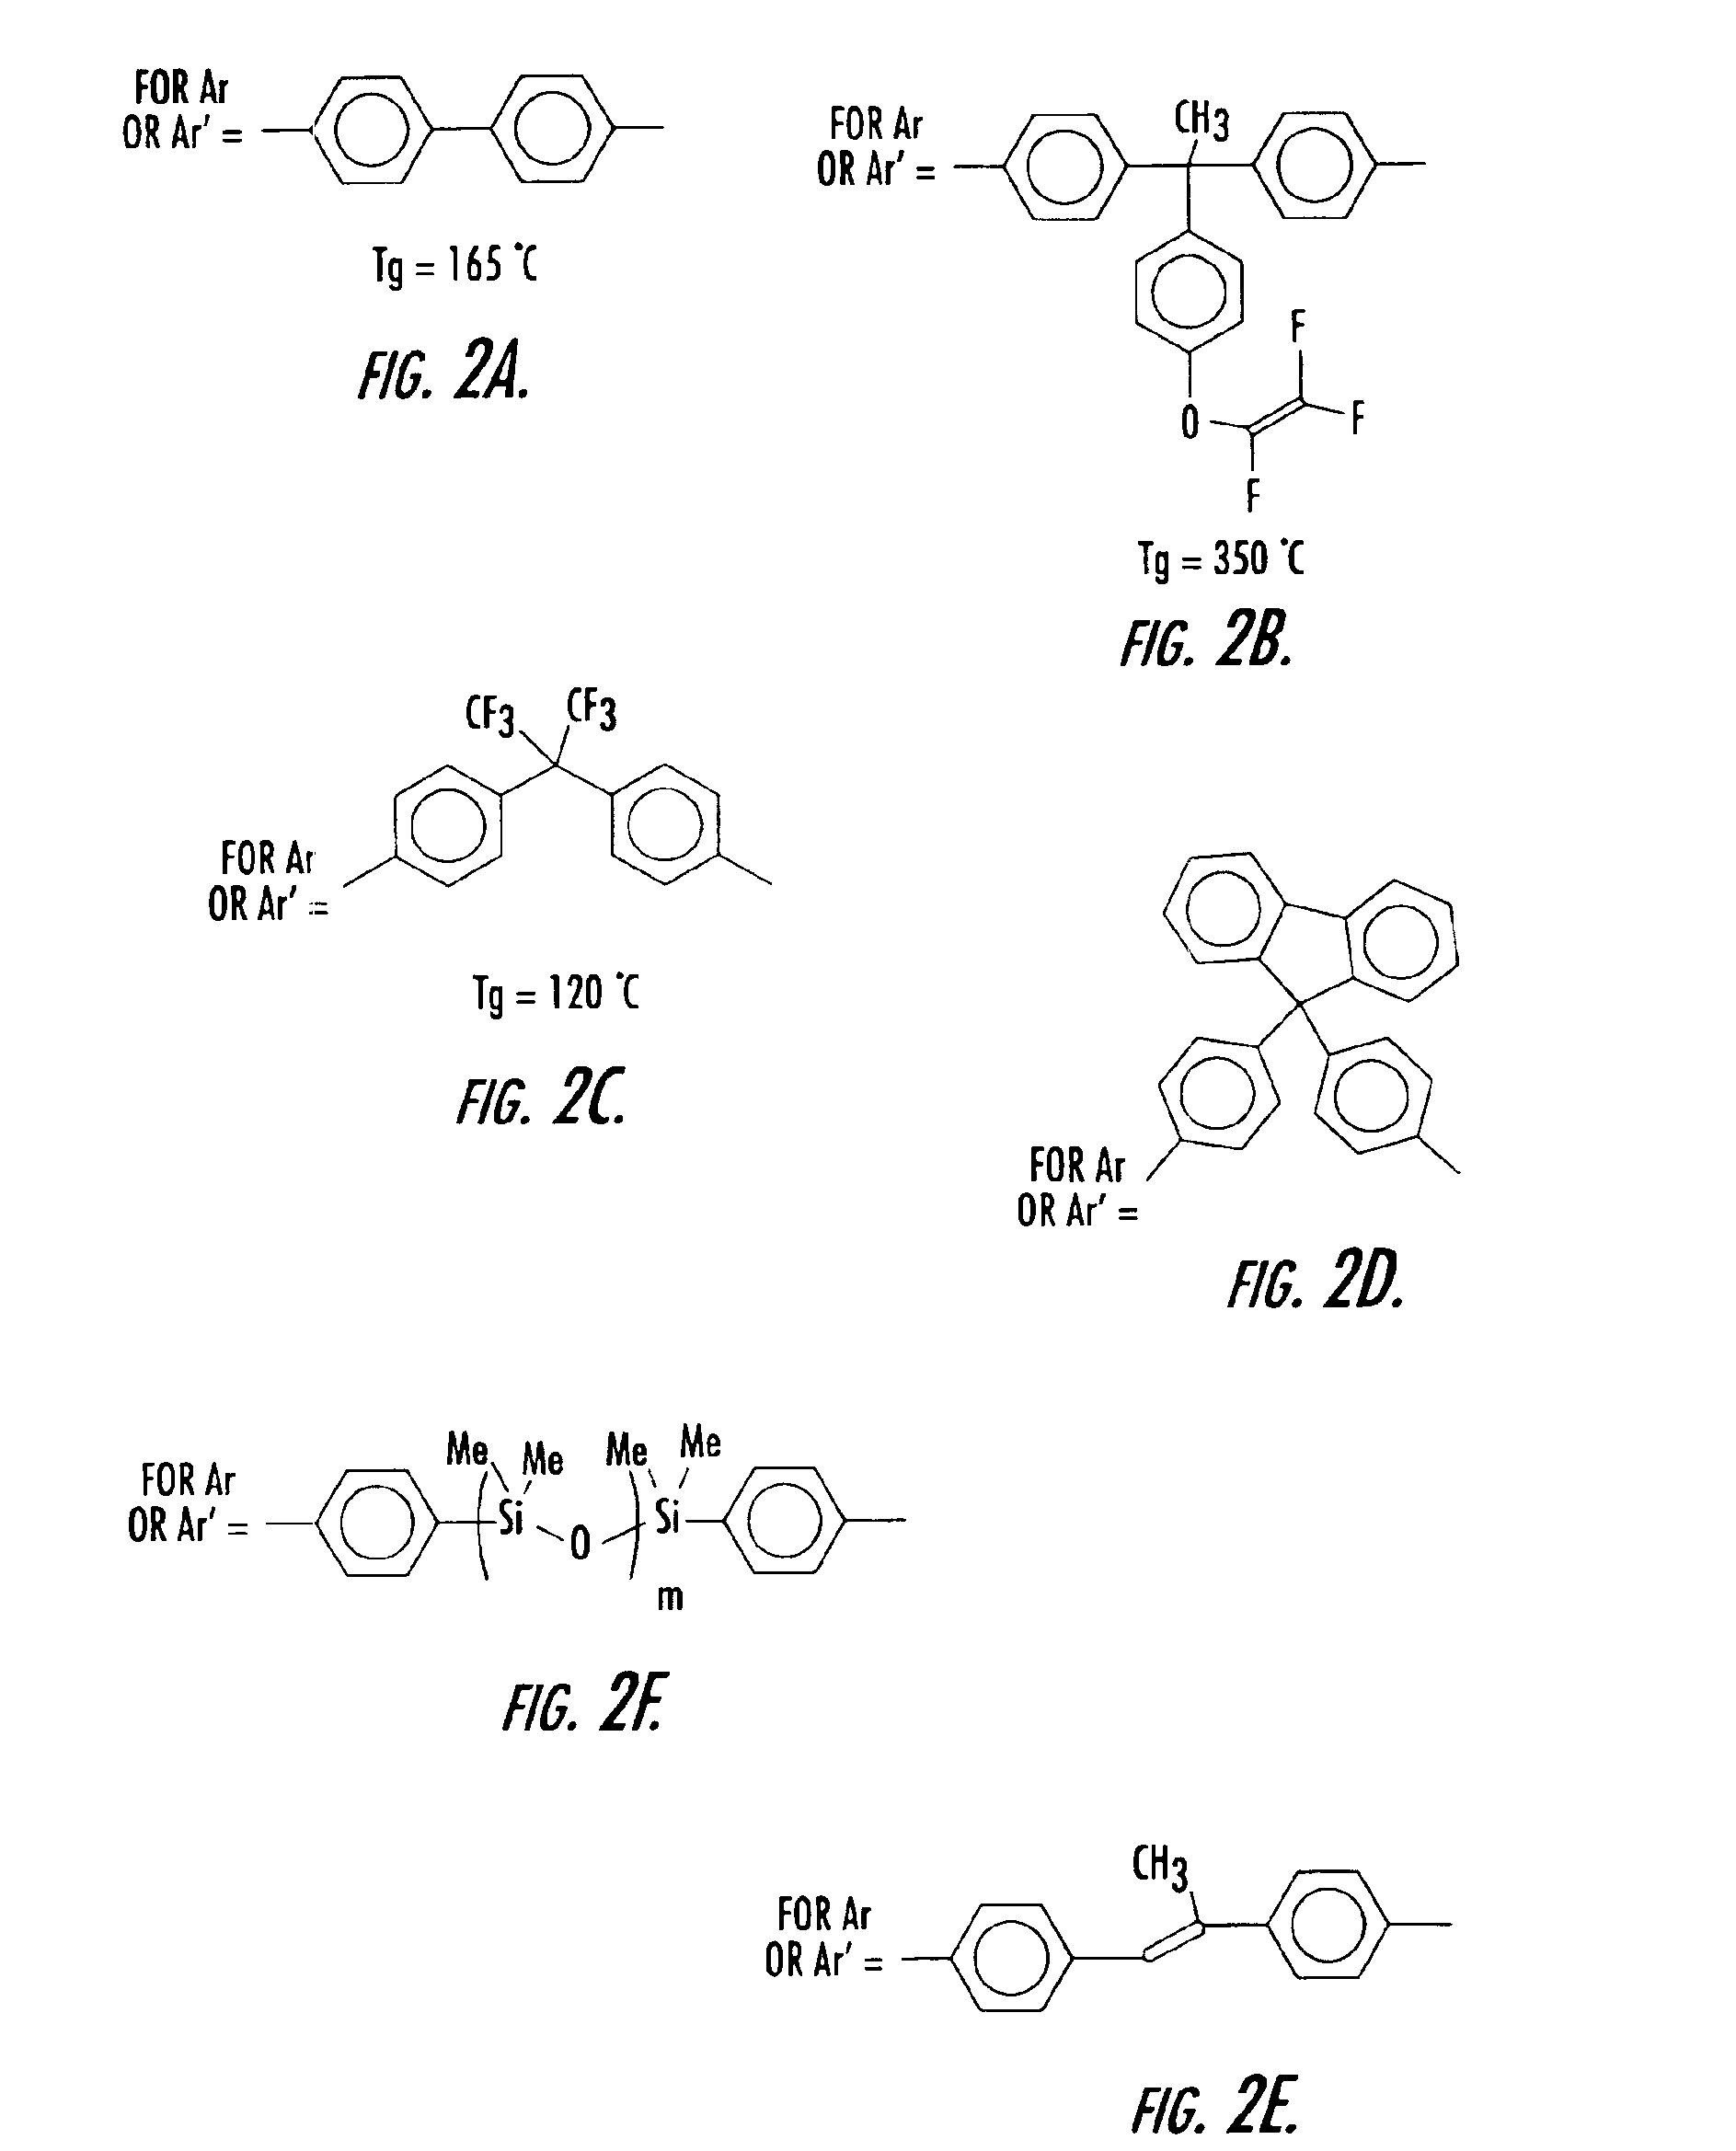 Fluoropolymer compositions, optical devices, and methods for fabricating optical devices